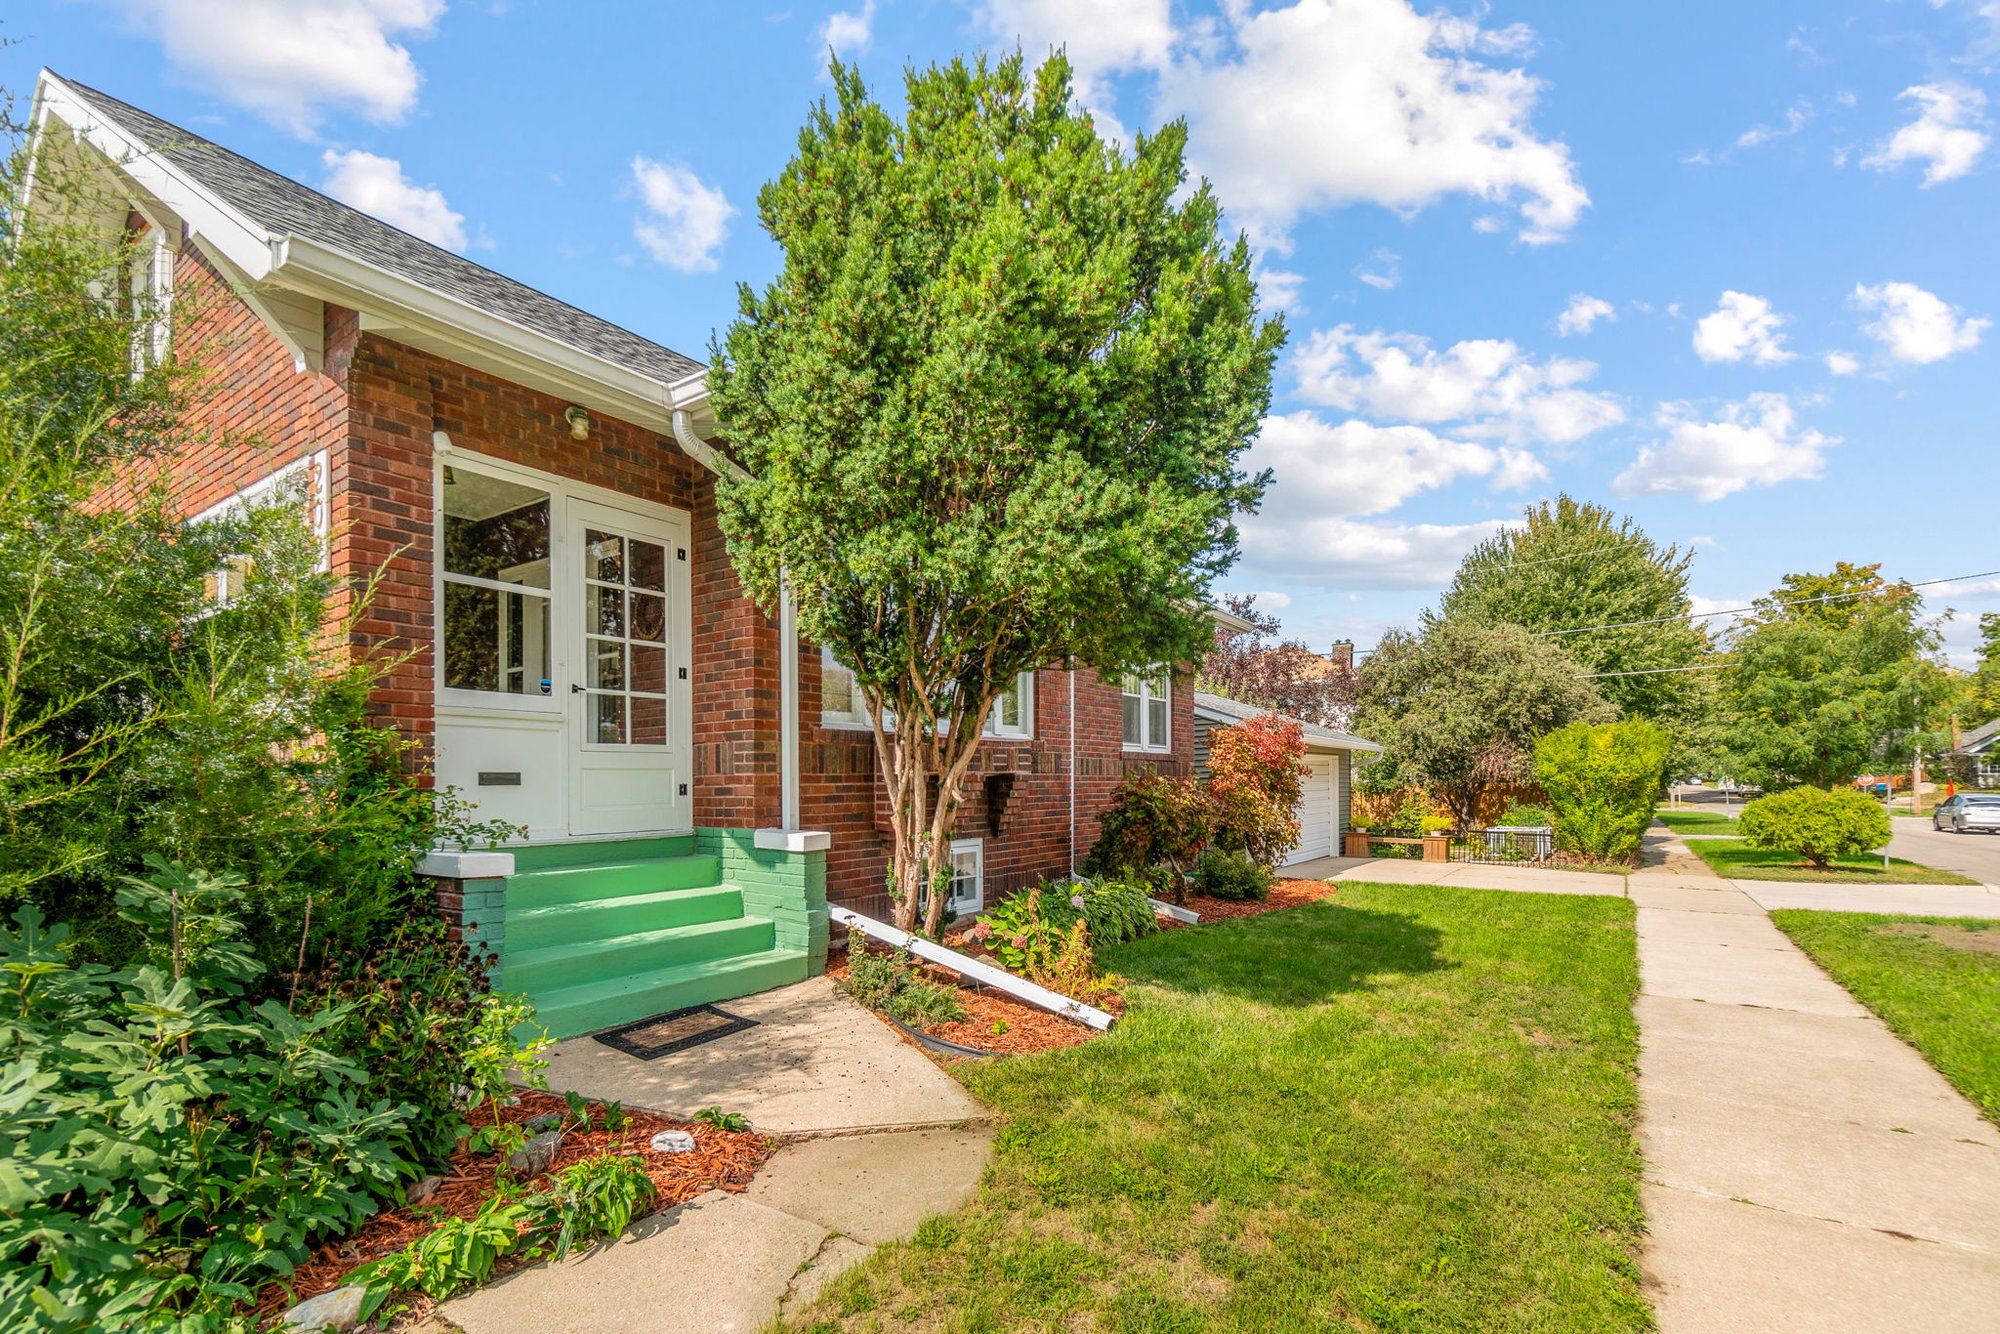 Looking for a lovely new home that's move-in ready? Look no further than this charming 2-bedroom brick ranch!